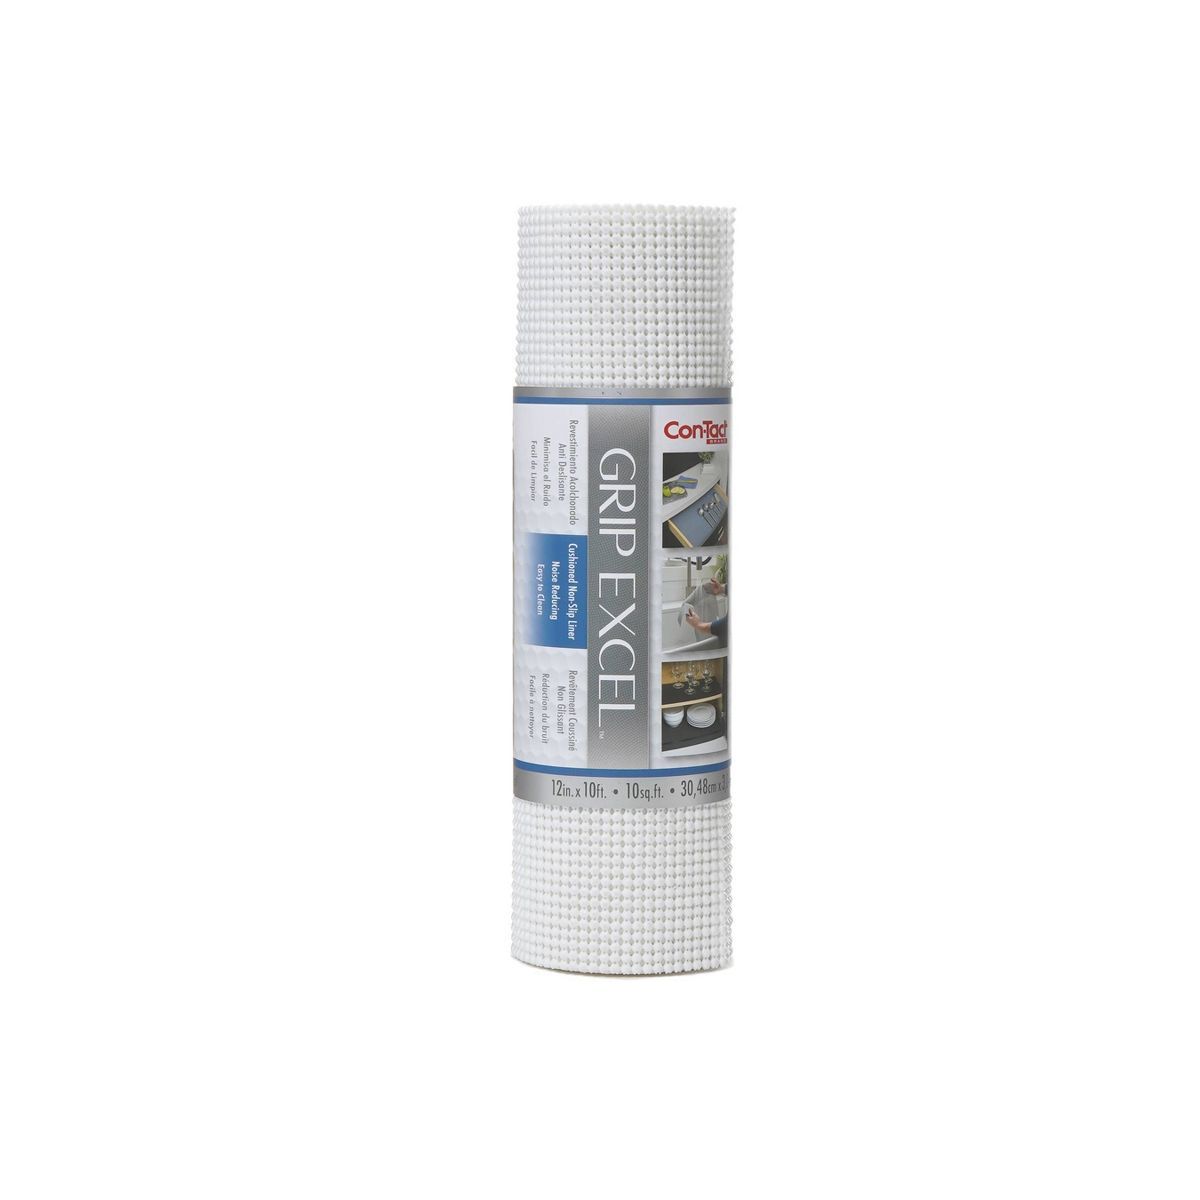 Con-Tact Brand Grip Excel Grip Non-Adhesive Shelf Liner- White (12''x 10') | Target